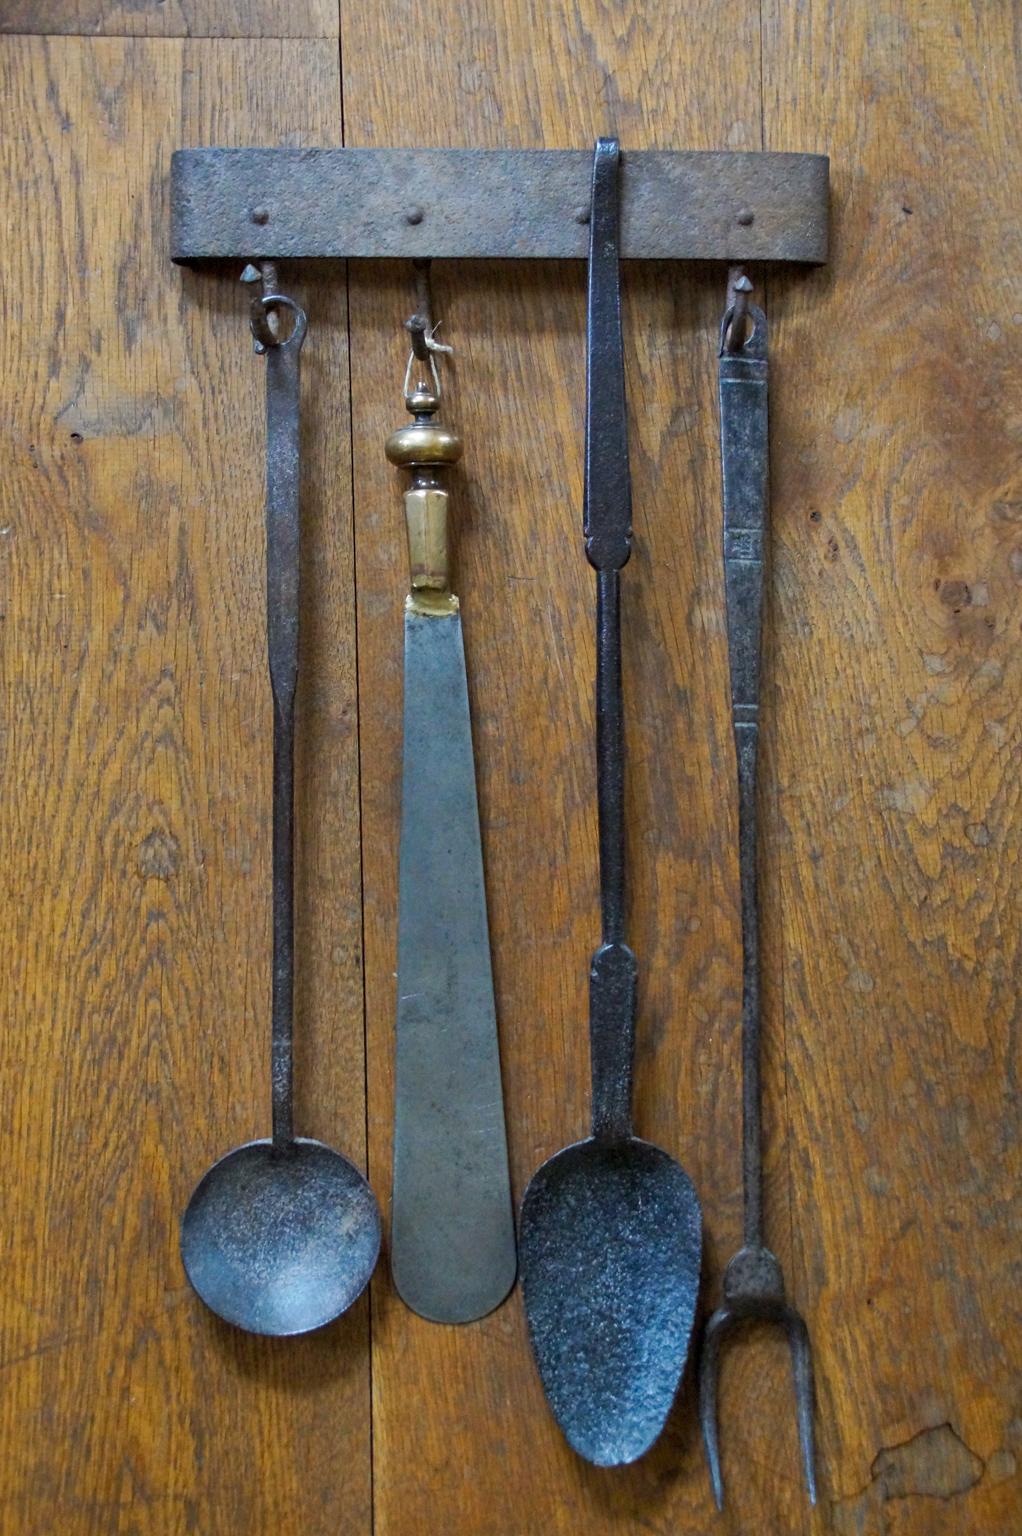 Beautiful 17th-18th century Dutch Louis XIV fireplace tool set. The set consists of a hanger and four fire irons and kitchen tools, all made of wrought iron and hand forged. The spatula has a bronze handle. The tool set is in a good condition and is